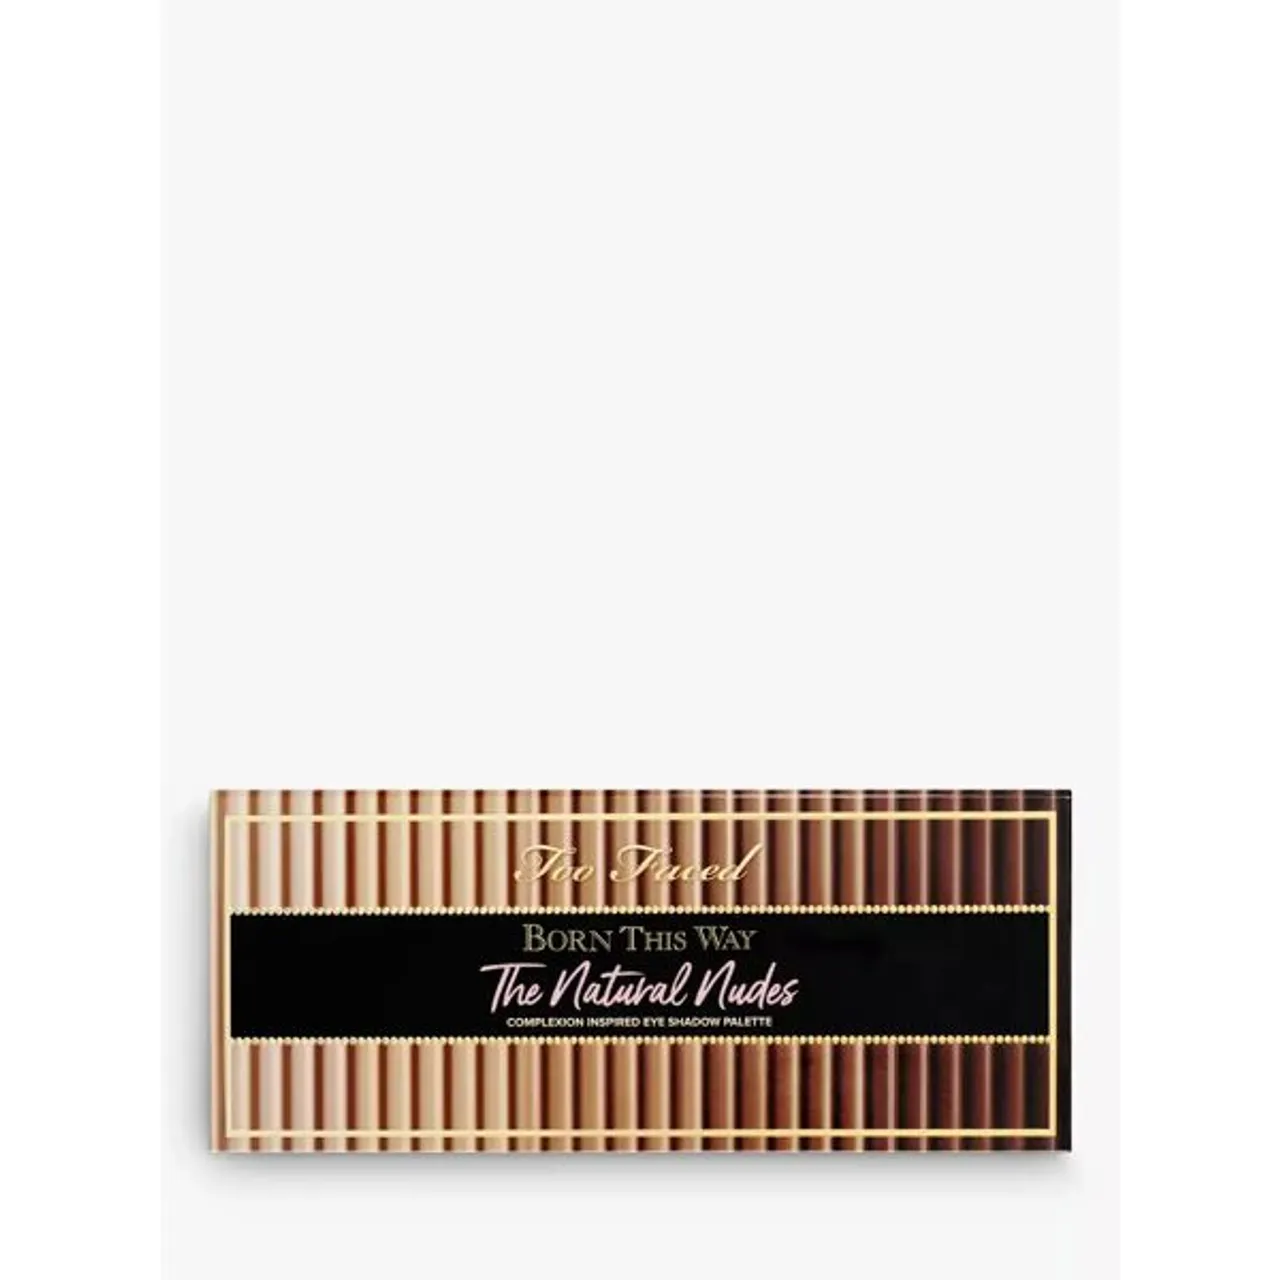 Too Faced Born This Way The Natural Nudes Eyeshadow Palette, Multi - Multi - Unisex